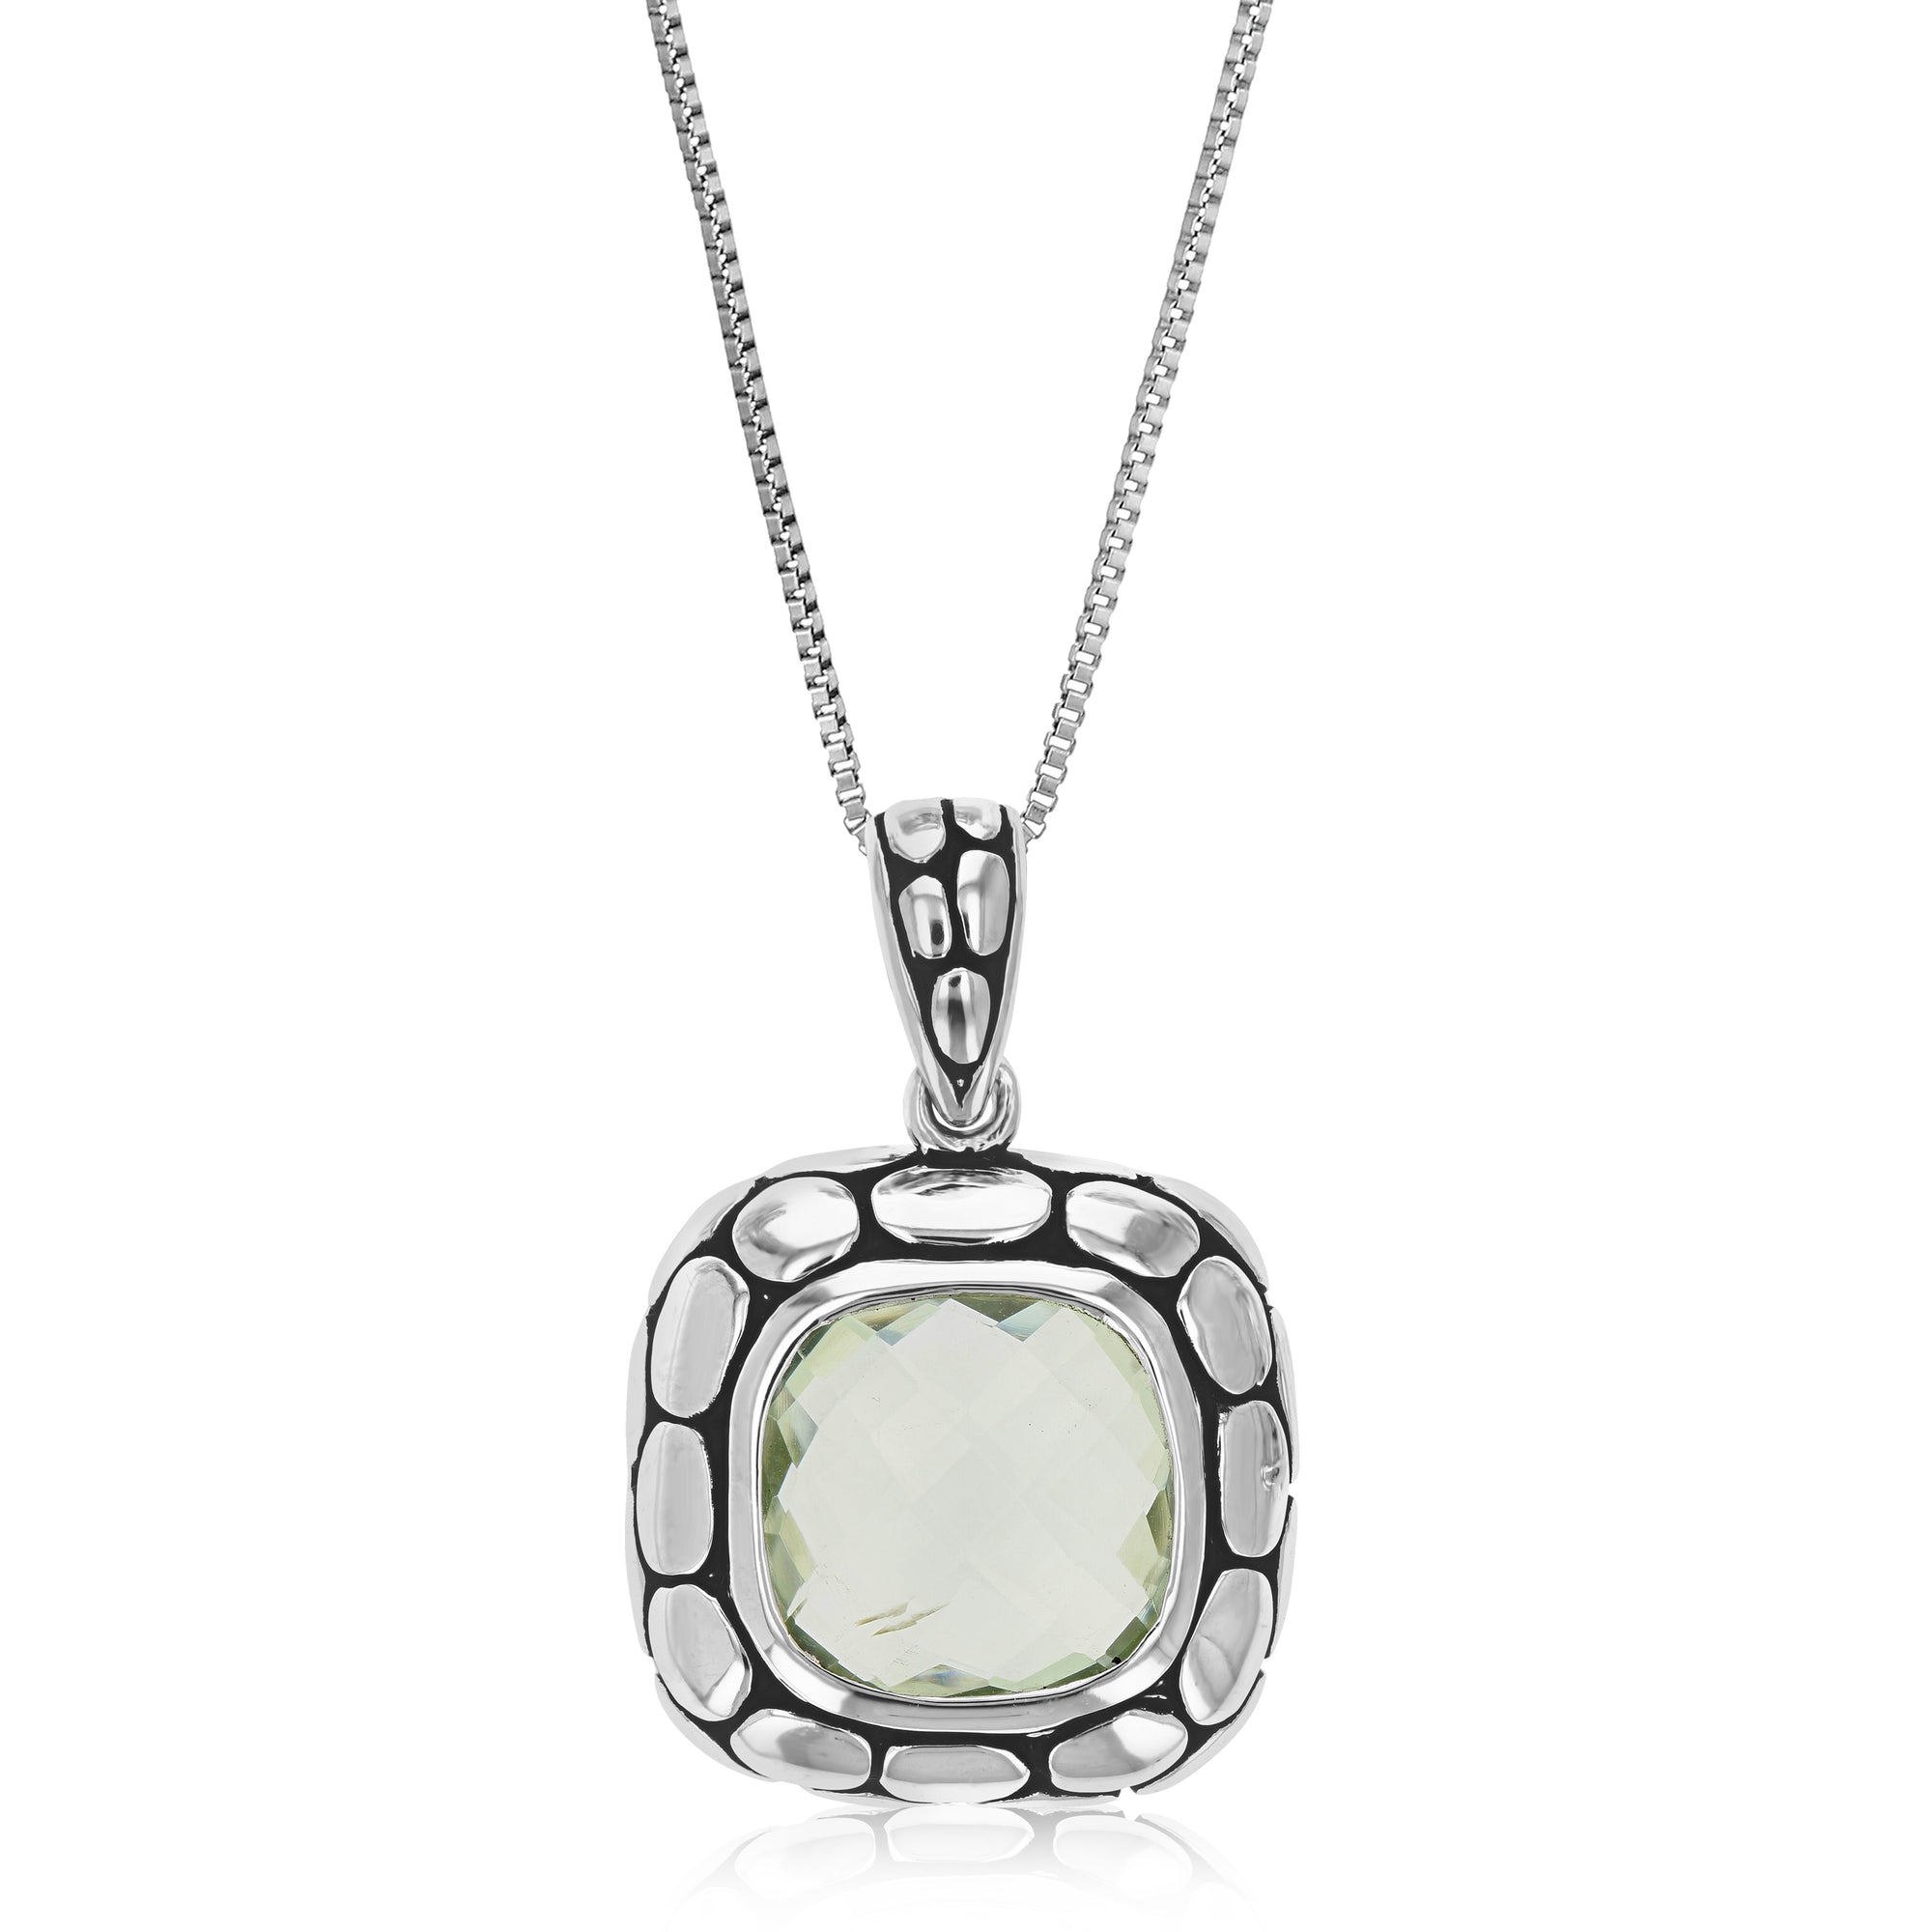 5 cttw Green Amethyst Pendant Necklace .925 Sterling Silver 12 MM Cushion Cut